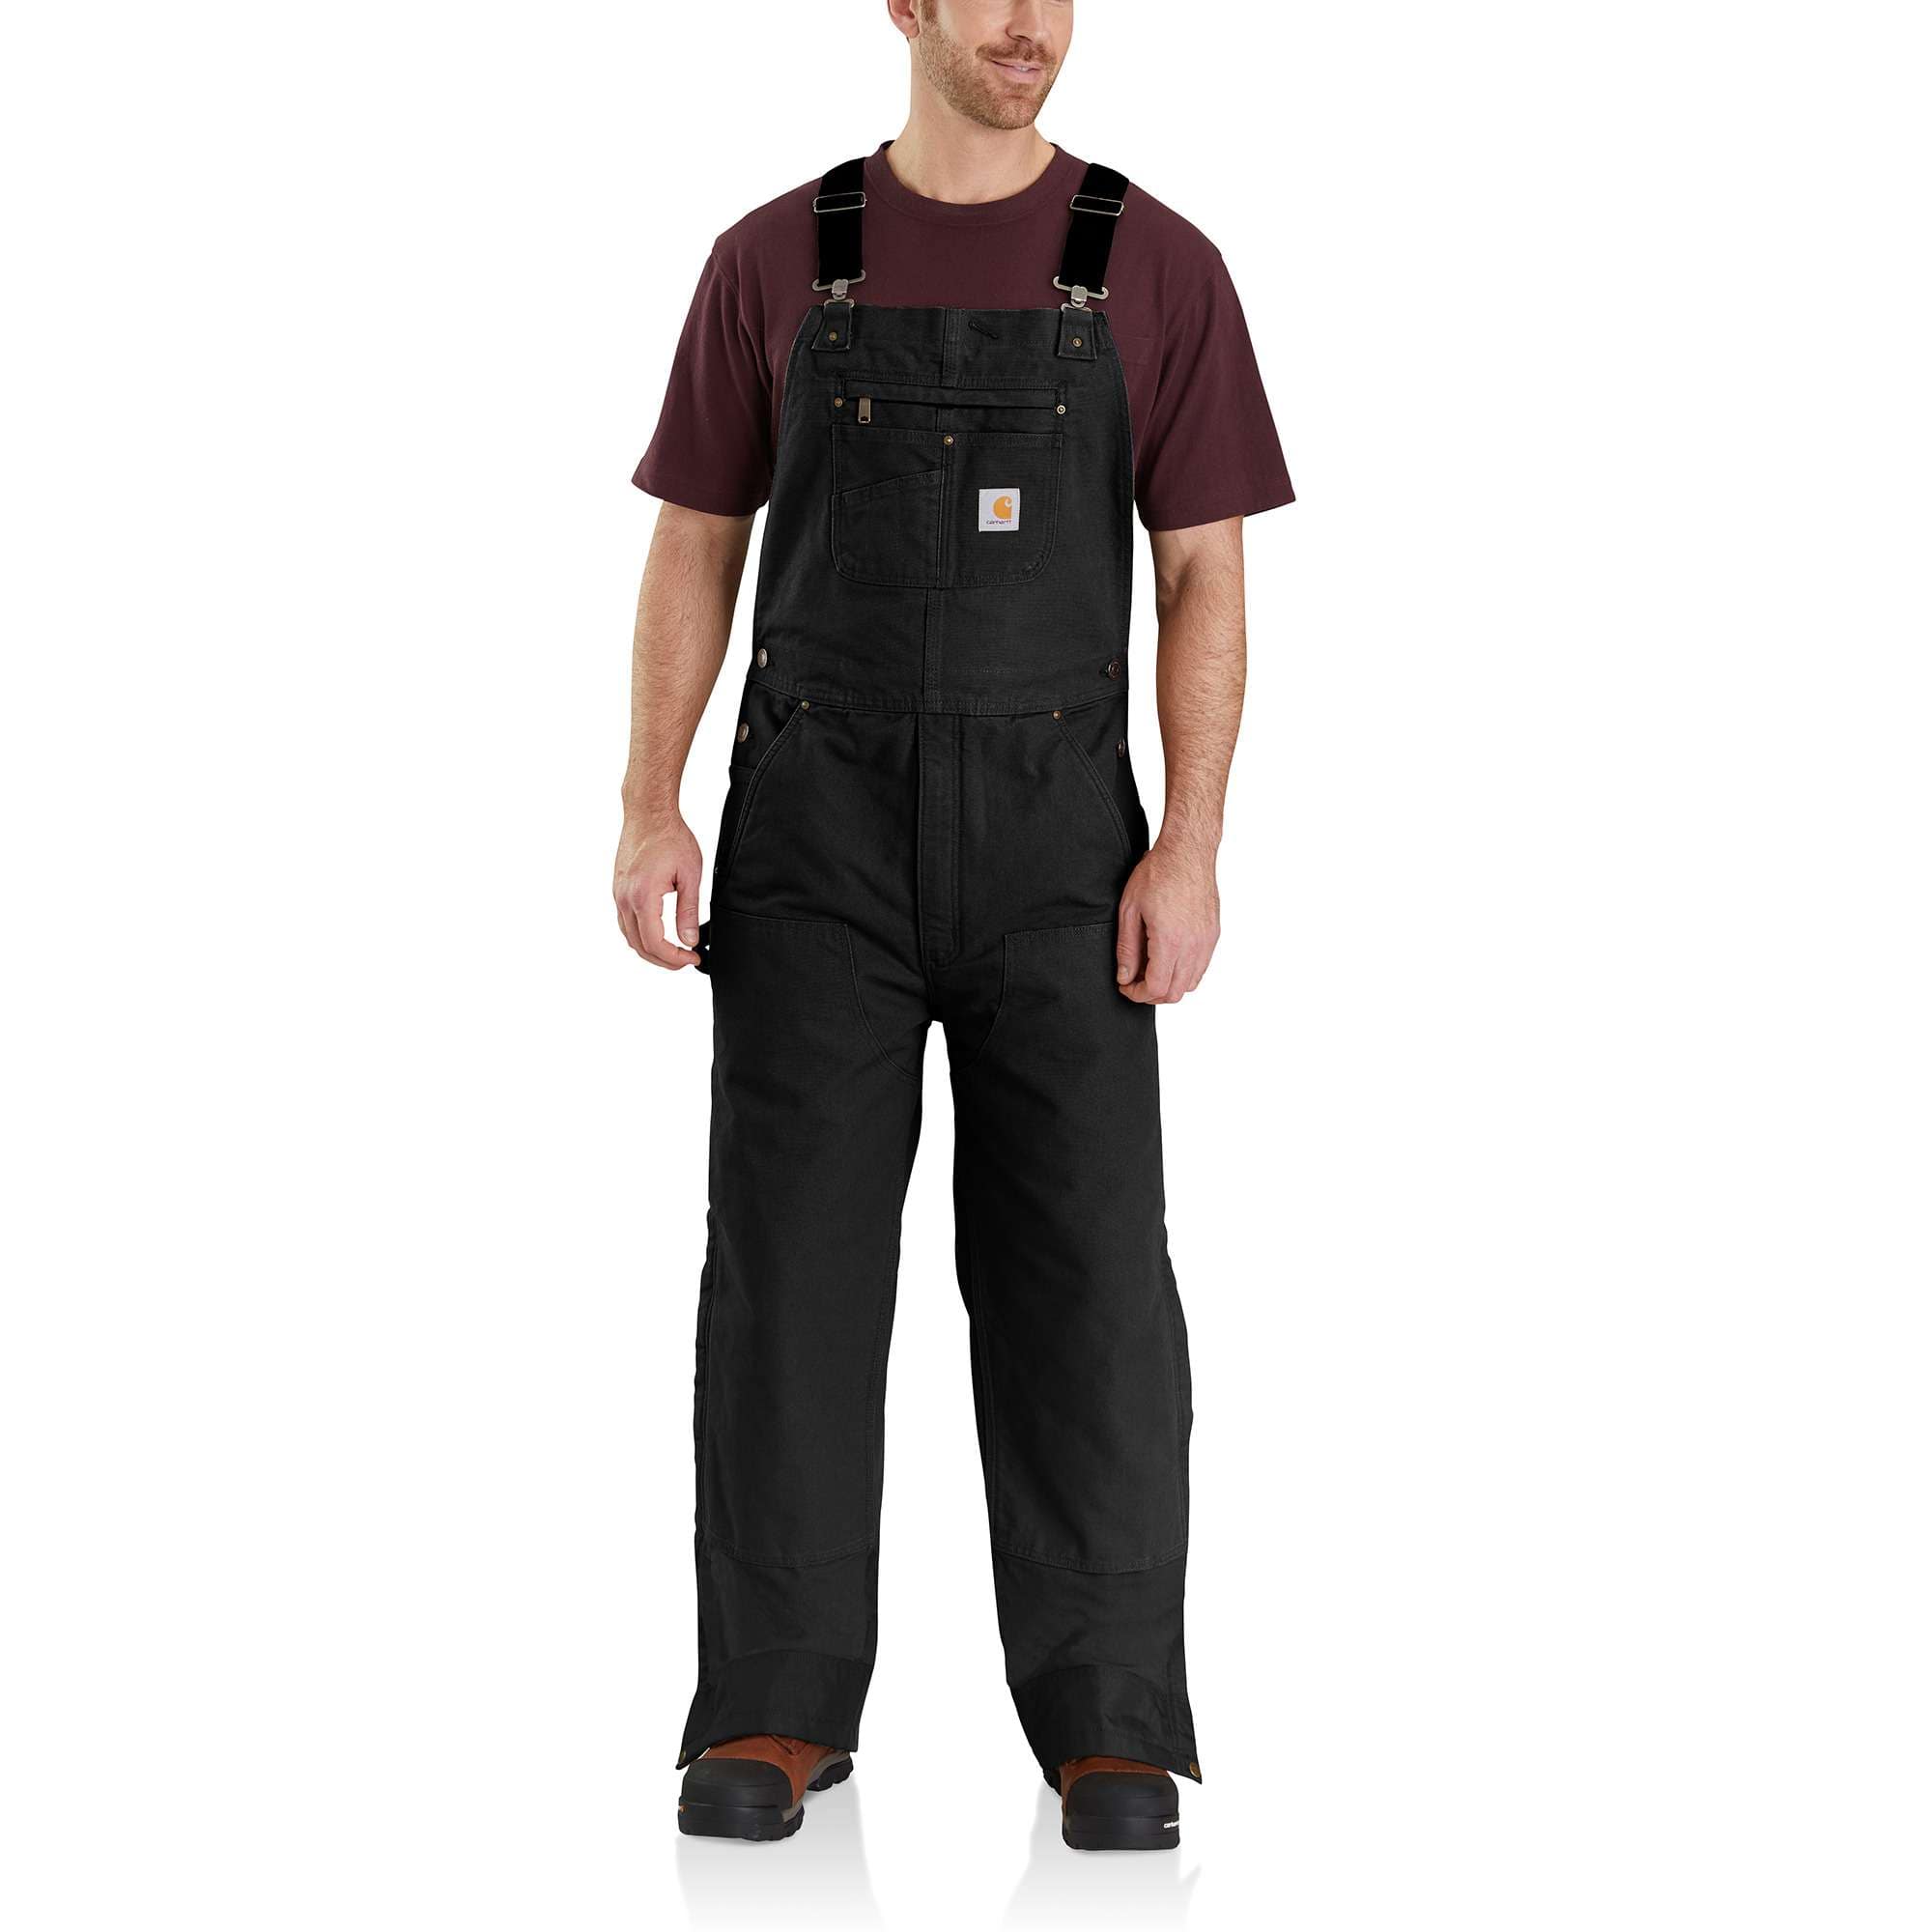 Men's Insulated Bib Overall - Relaxed Fit Duck 3 Warmest Rating